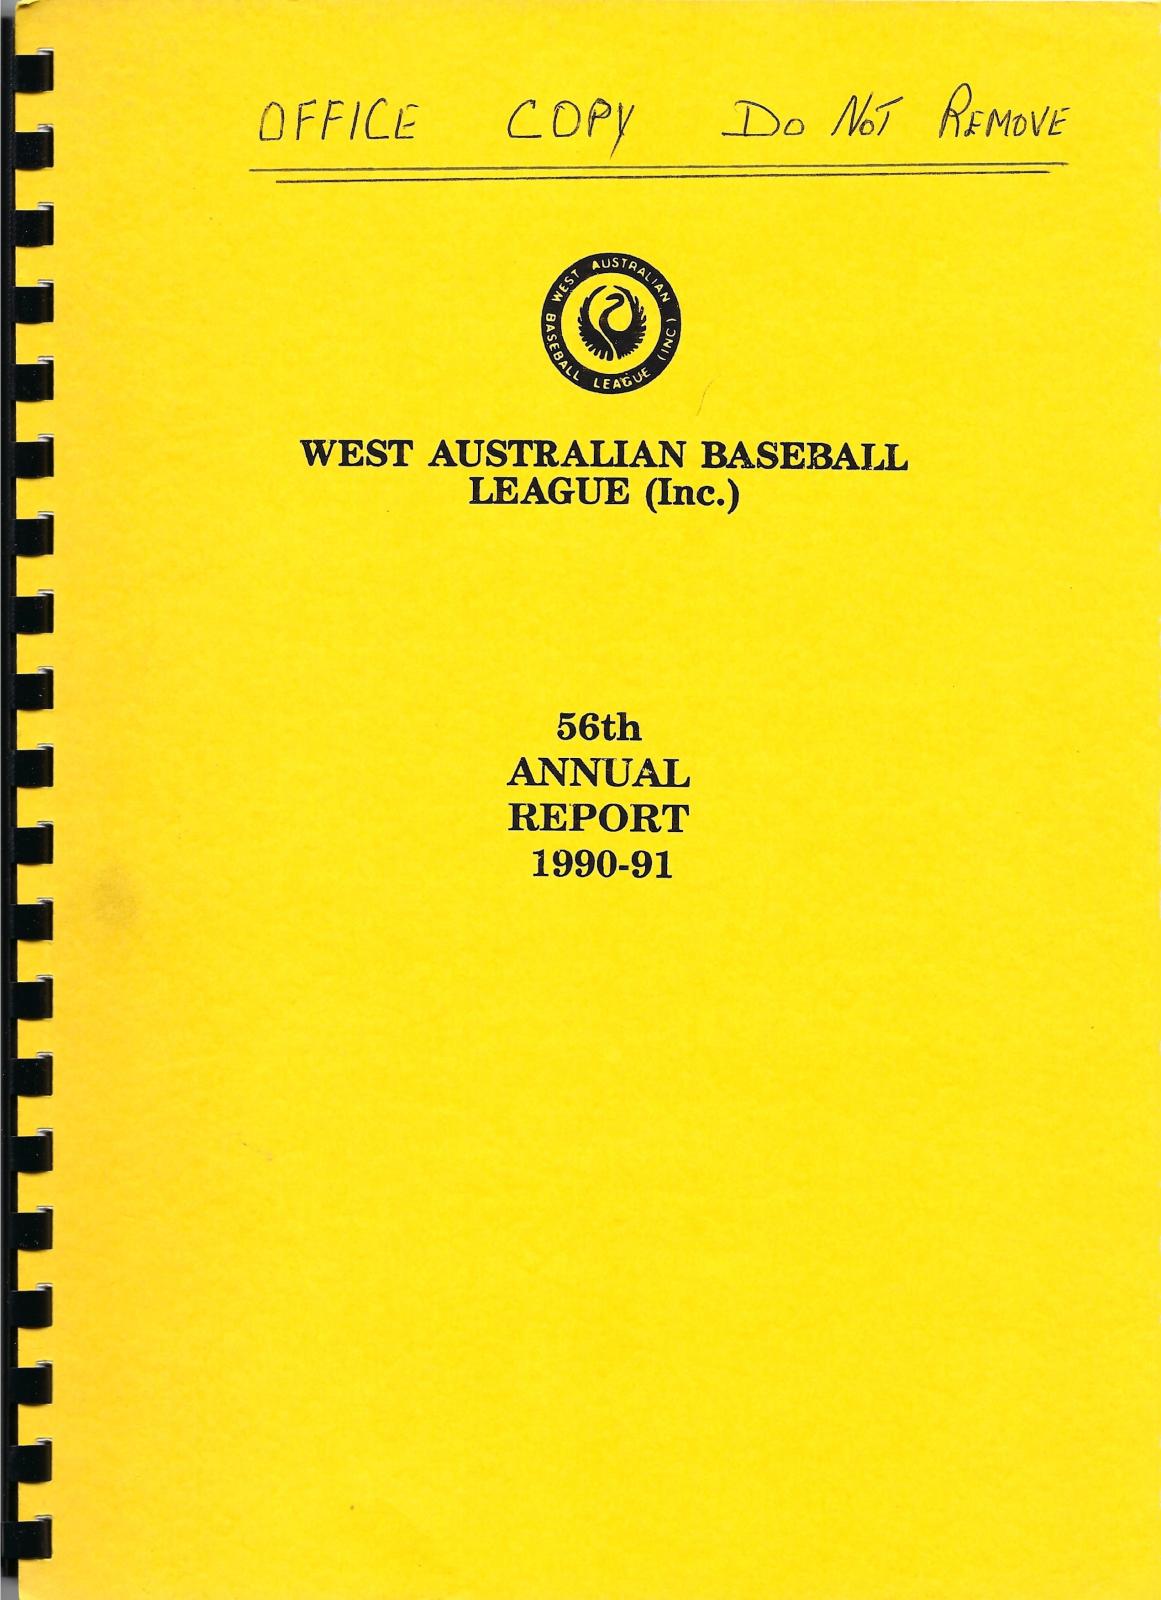 West Australian Baseball League 56th Annual Report 1990-91 cover page